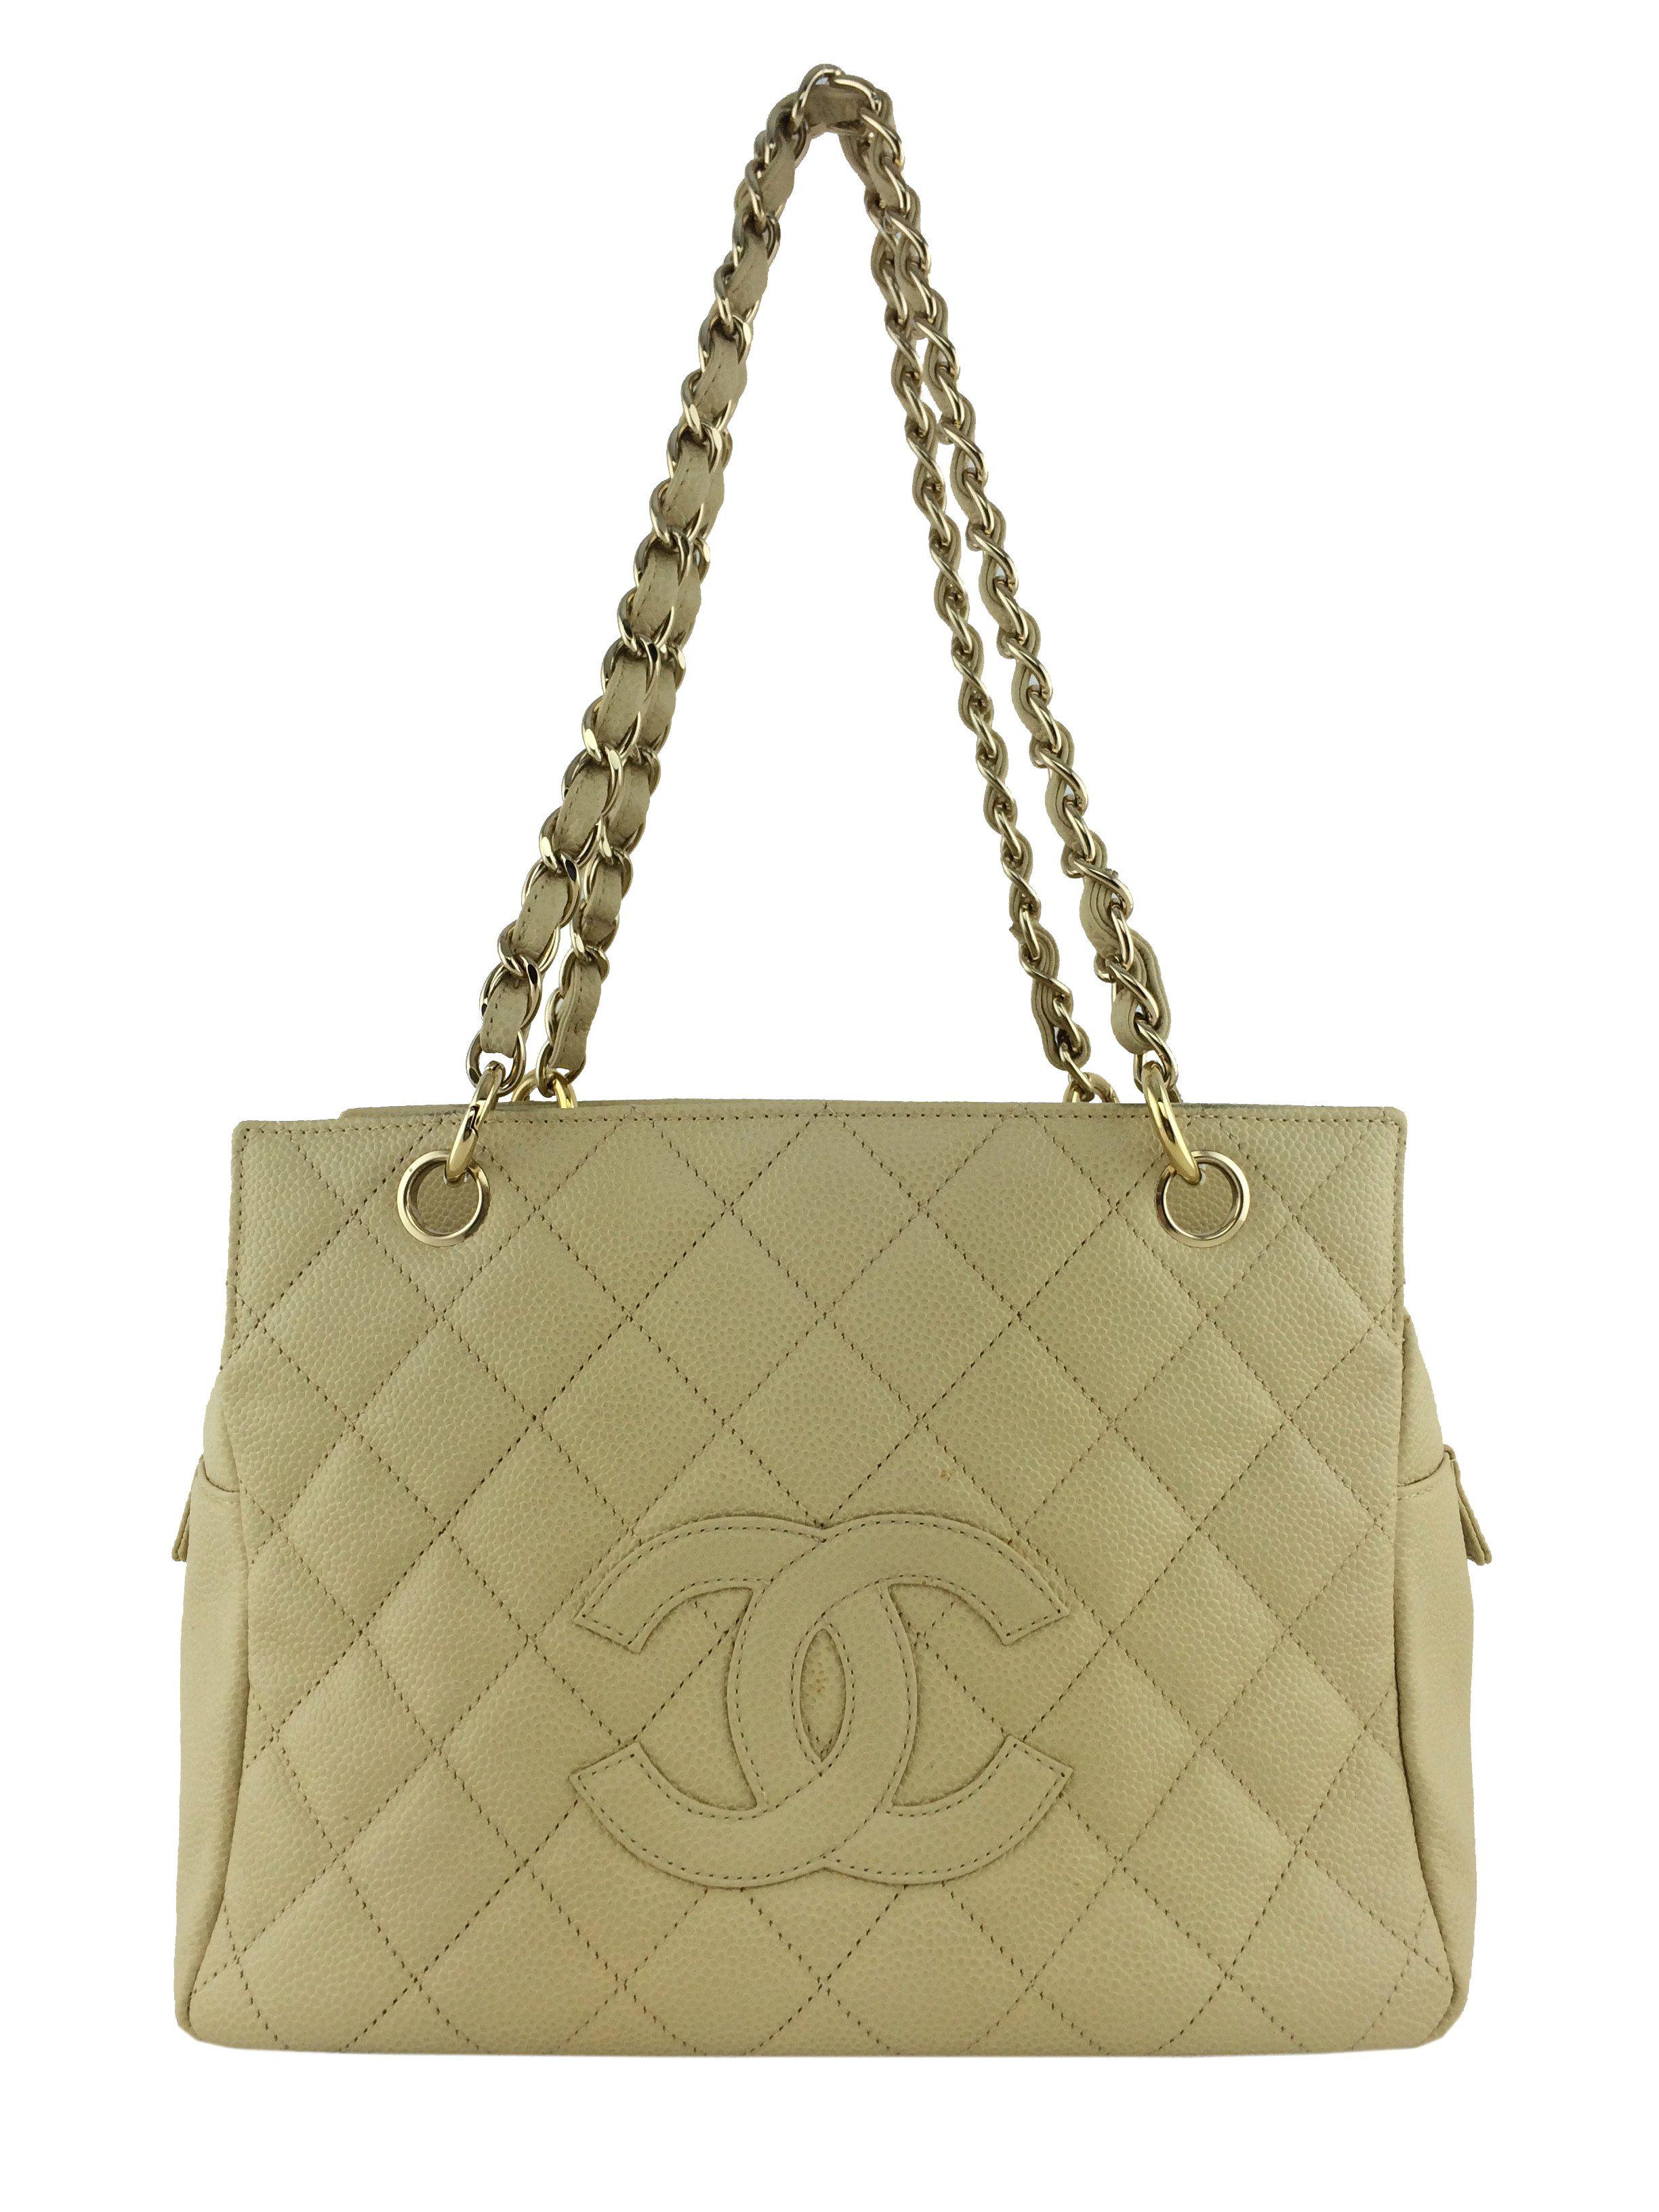 Chanel Caviar Leather Petite Timeless Tote Bag